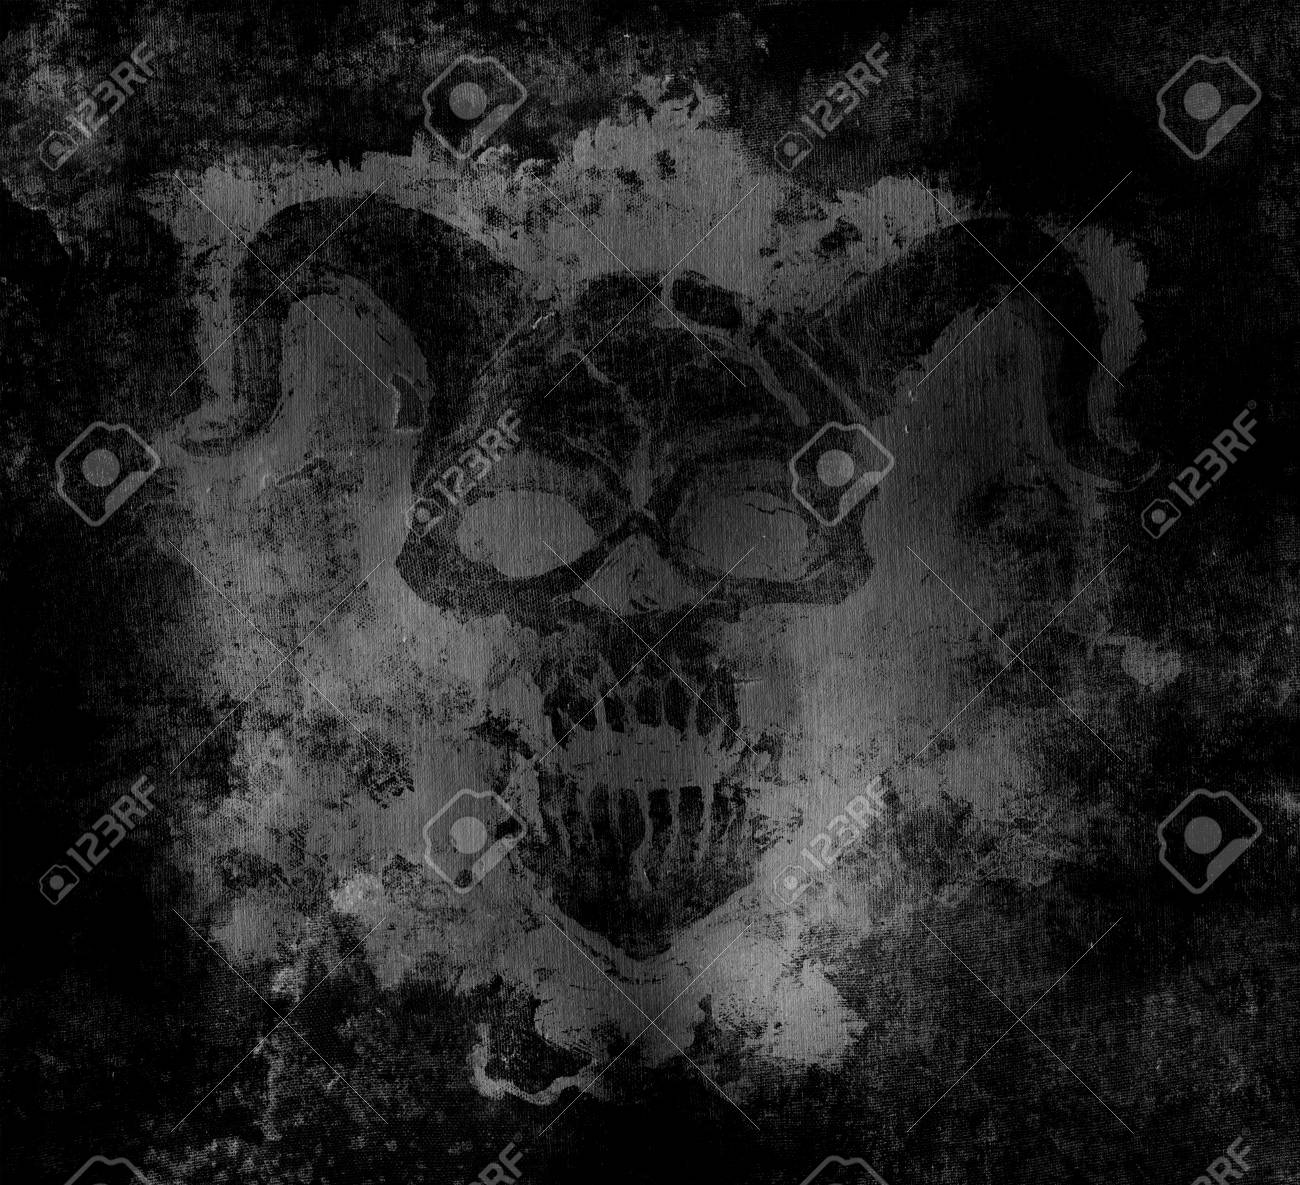 Evil Demon On Grunge Texture Background Stock Photo Picture And